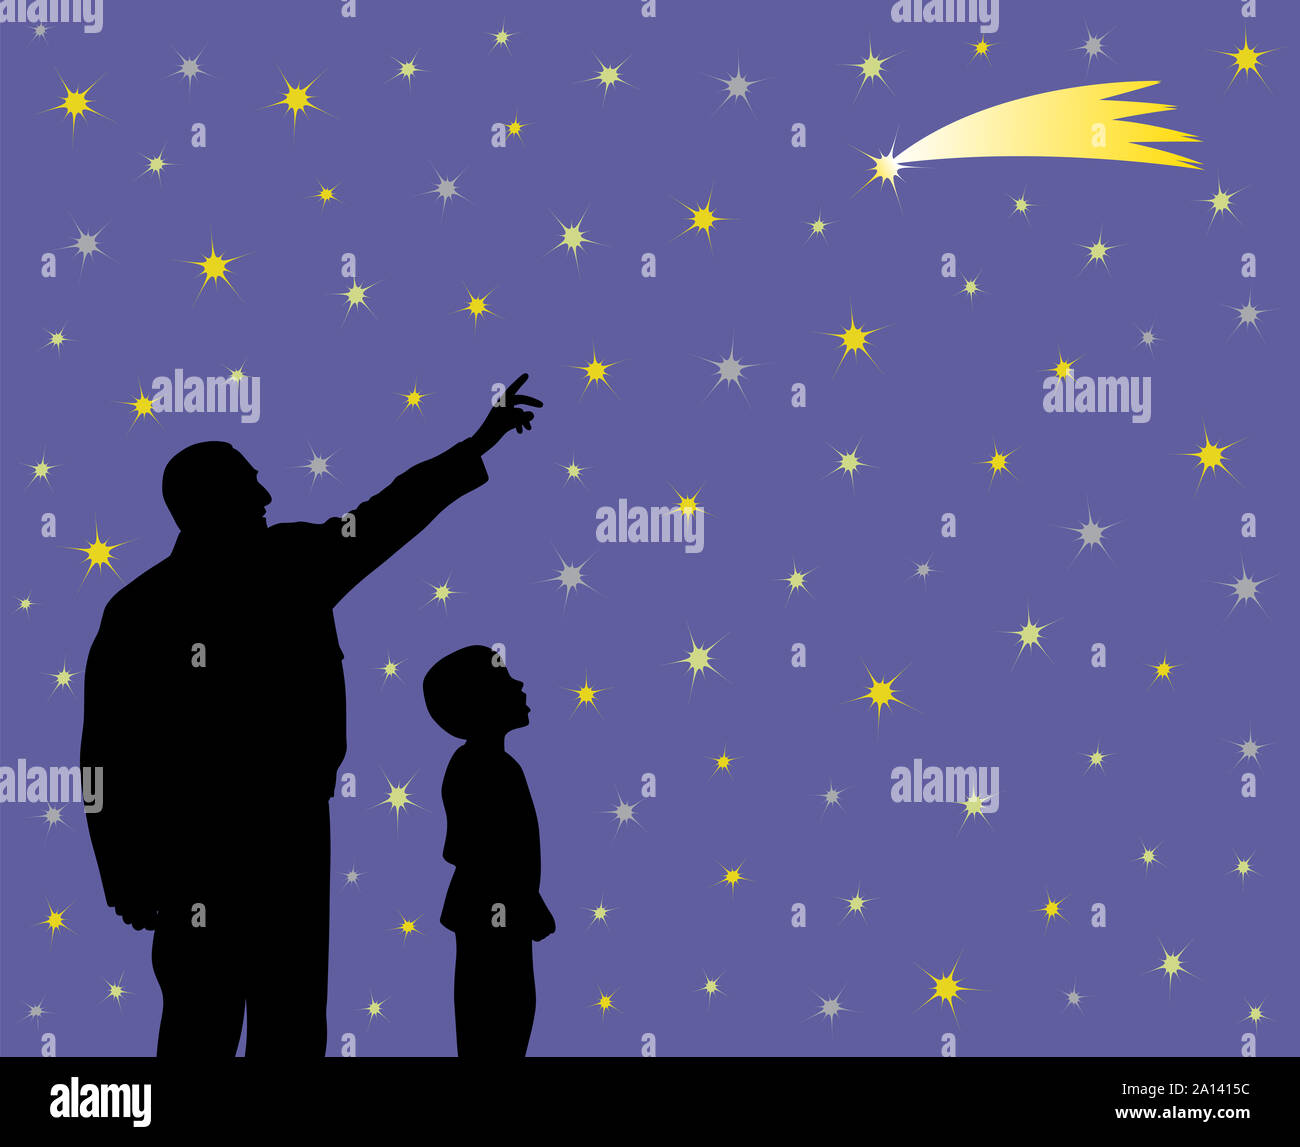 Father showing falling star to his amazed child. Father teaching kid about science, astronomy and his son can make a wish by seeing at shooting star. Stock Photo